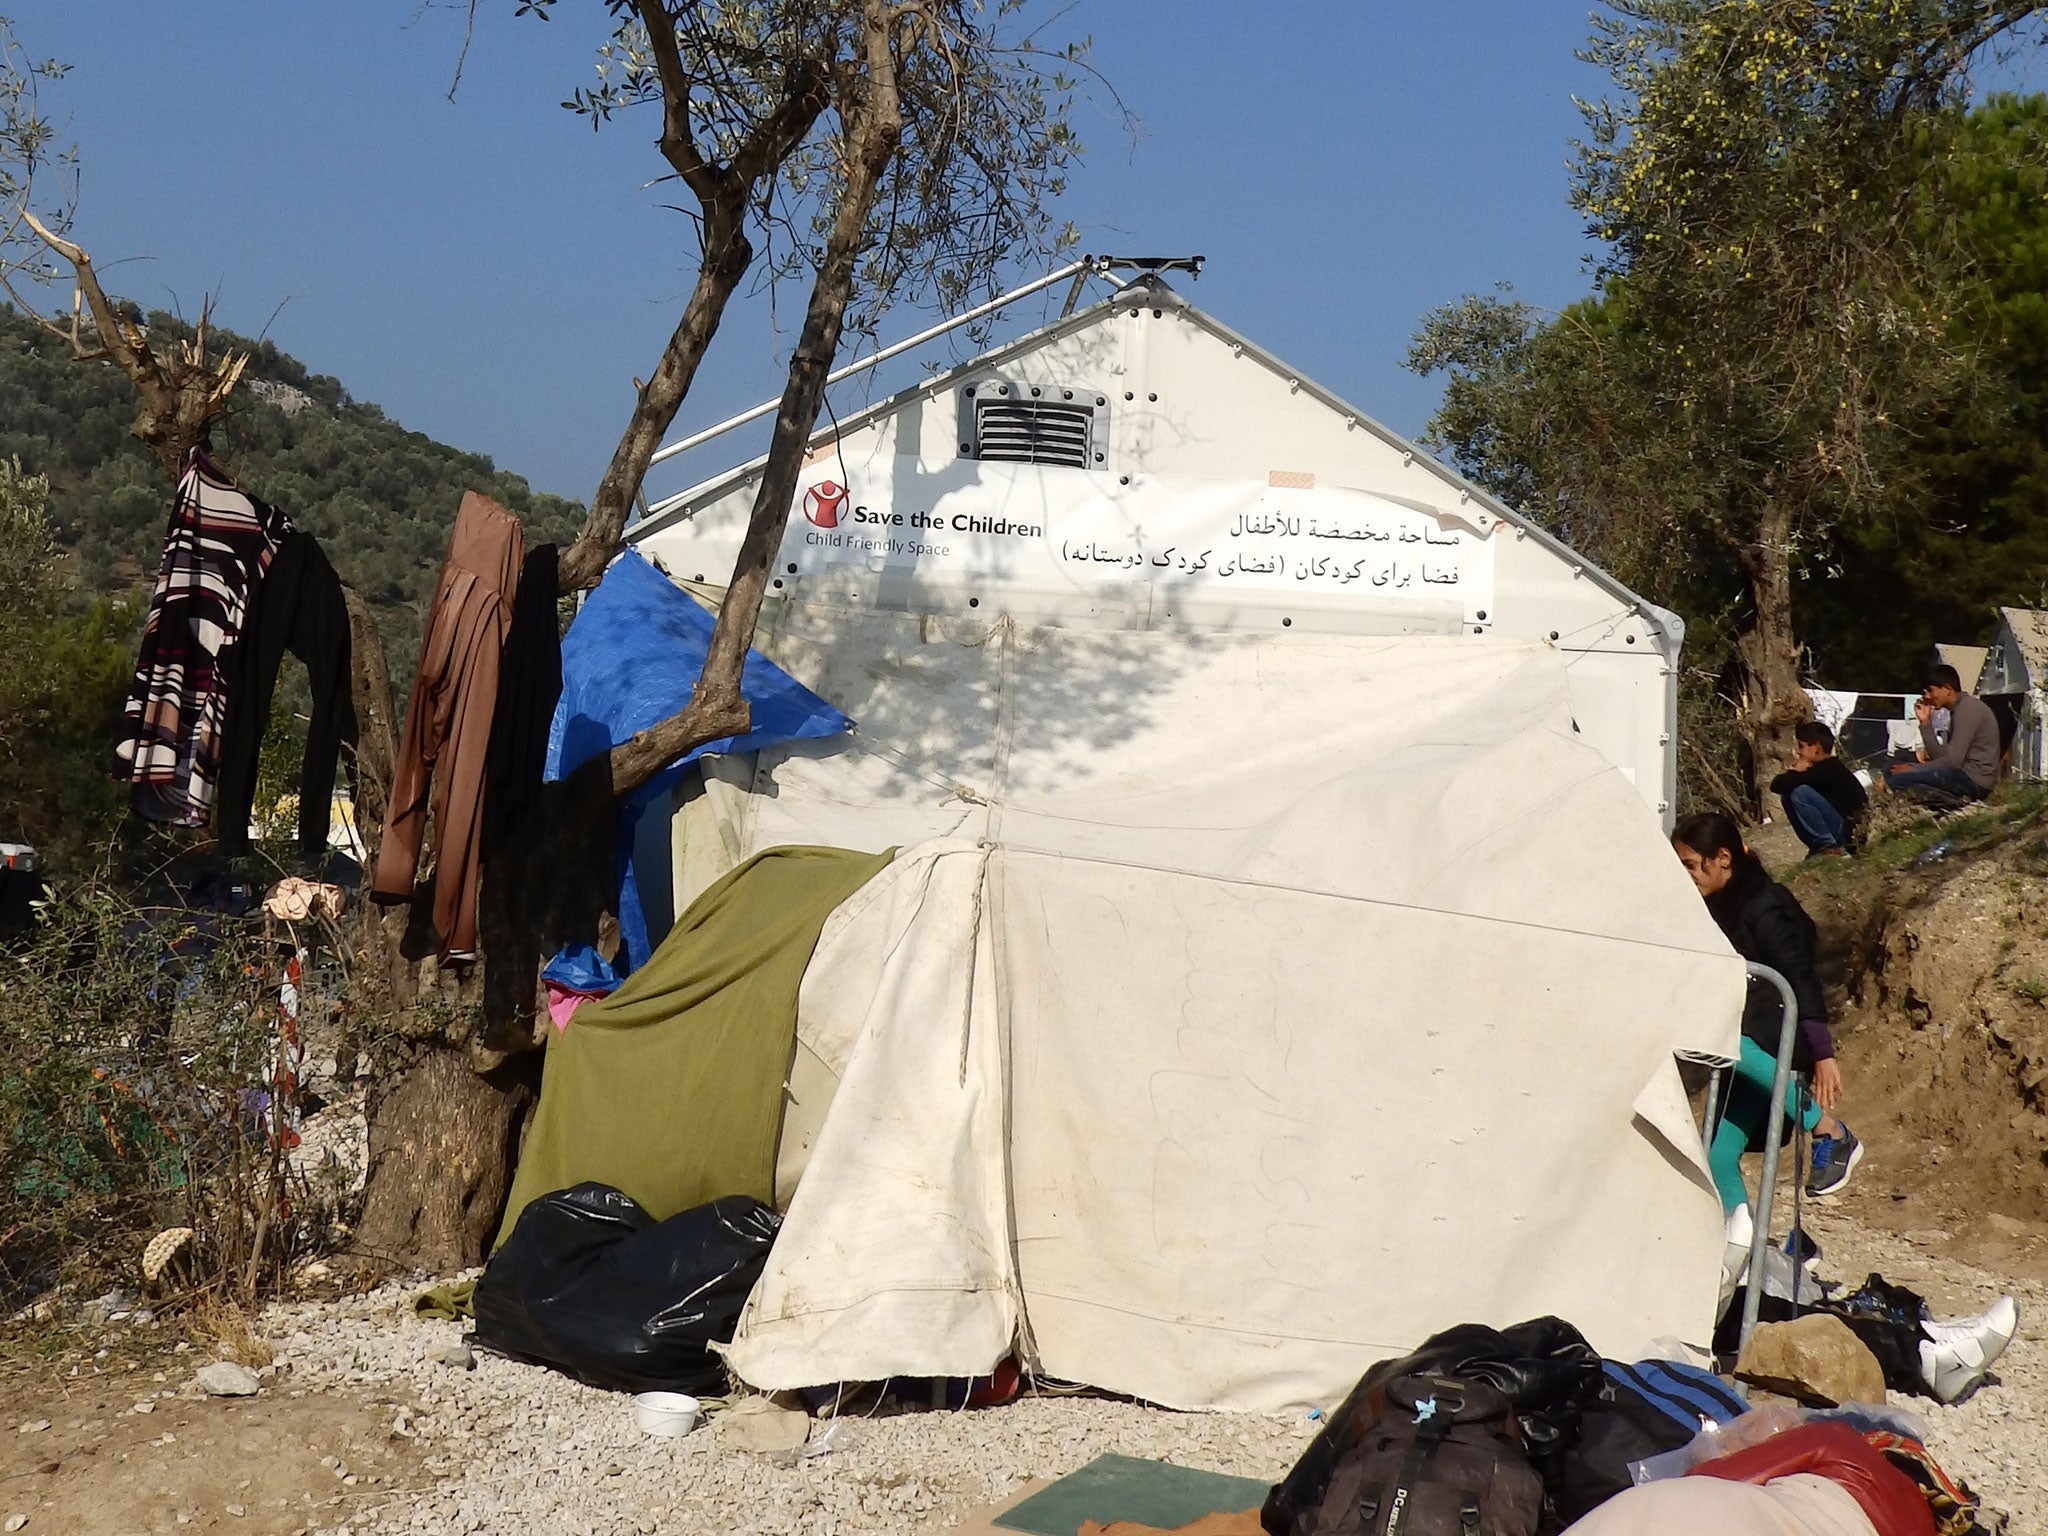 An Ikea shelter being used as a centre for women and children by Save the Children in the Moria refugee camp in Lesbos, Greece, in November 2015.